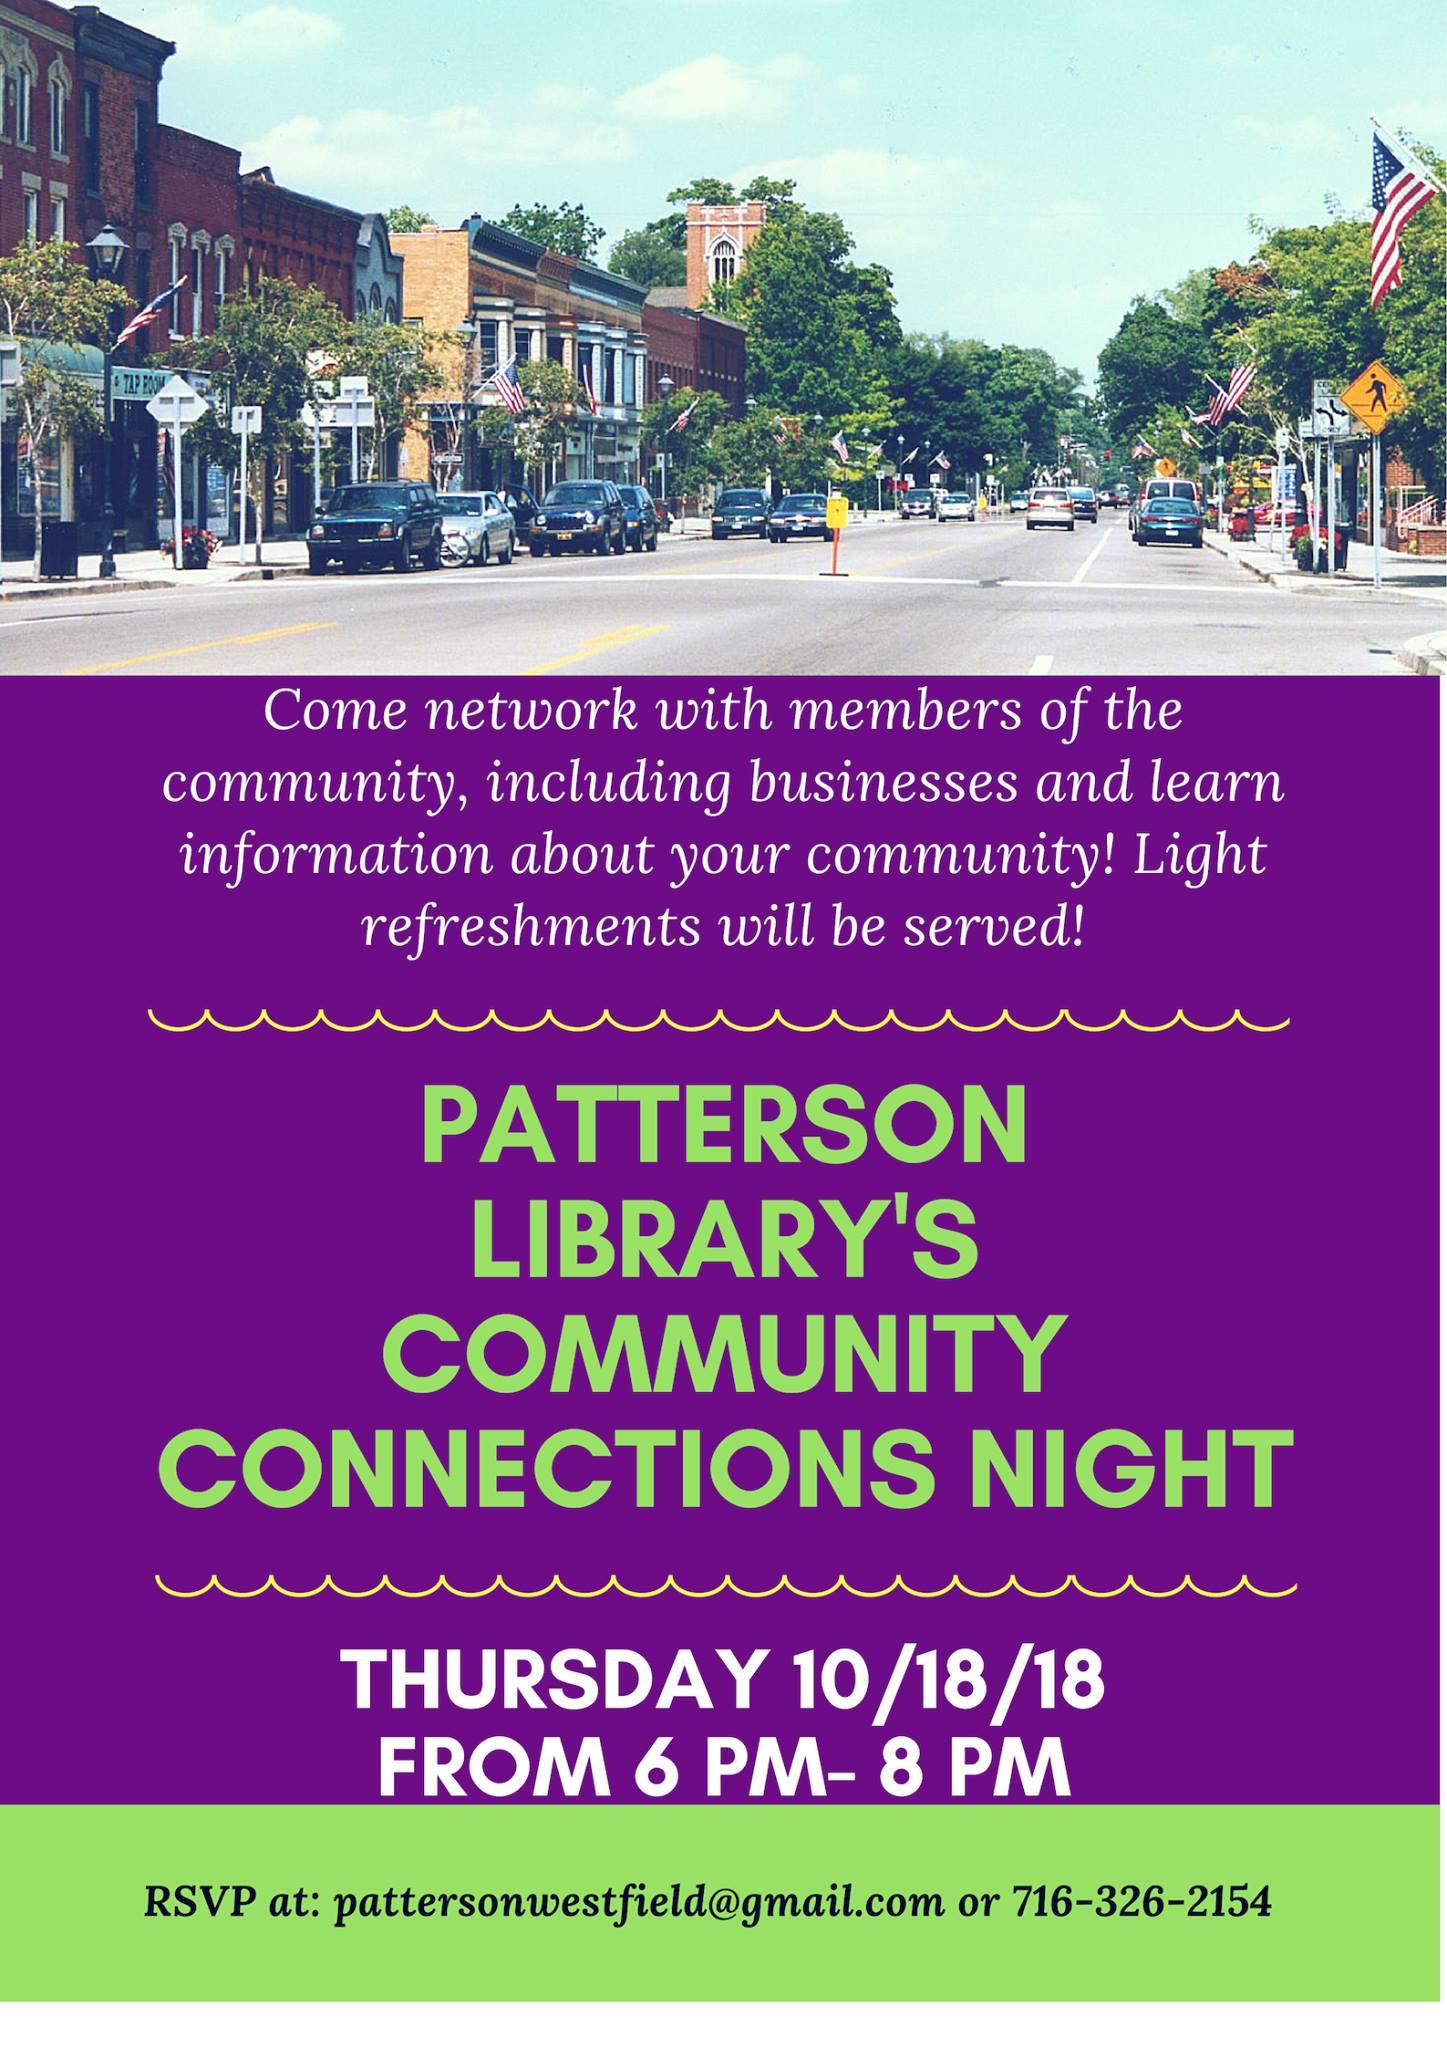 Patterson Library's Community Connections Night